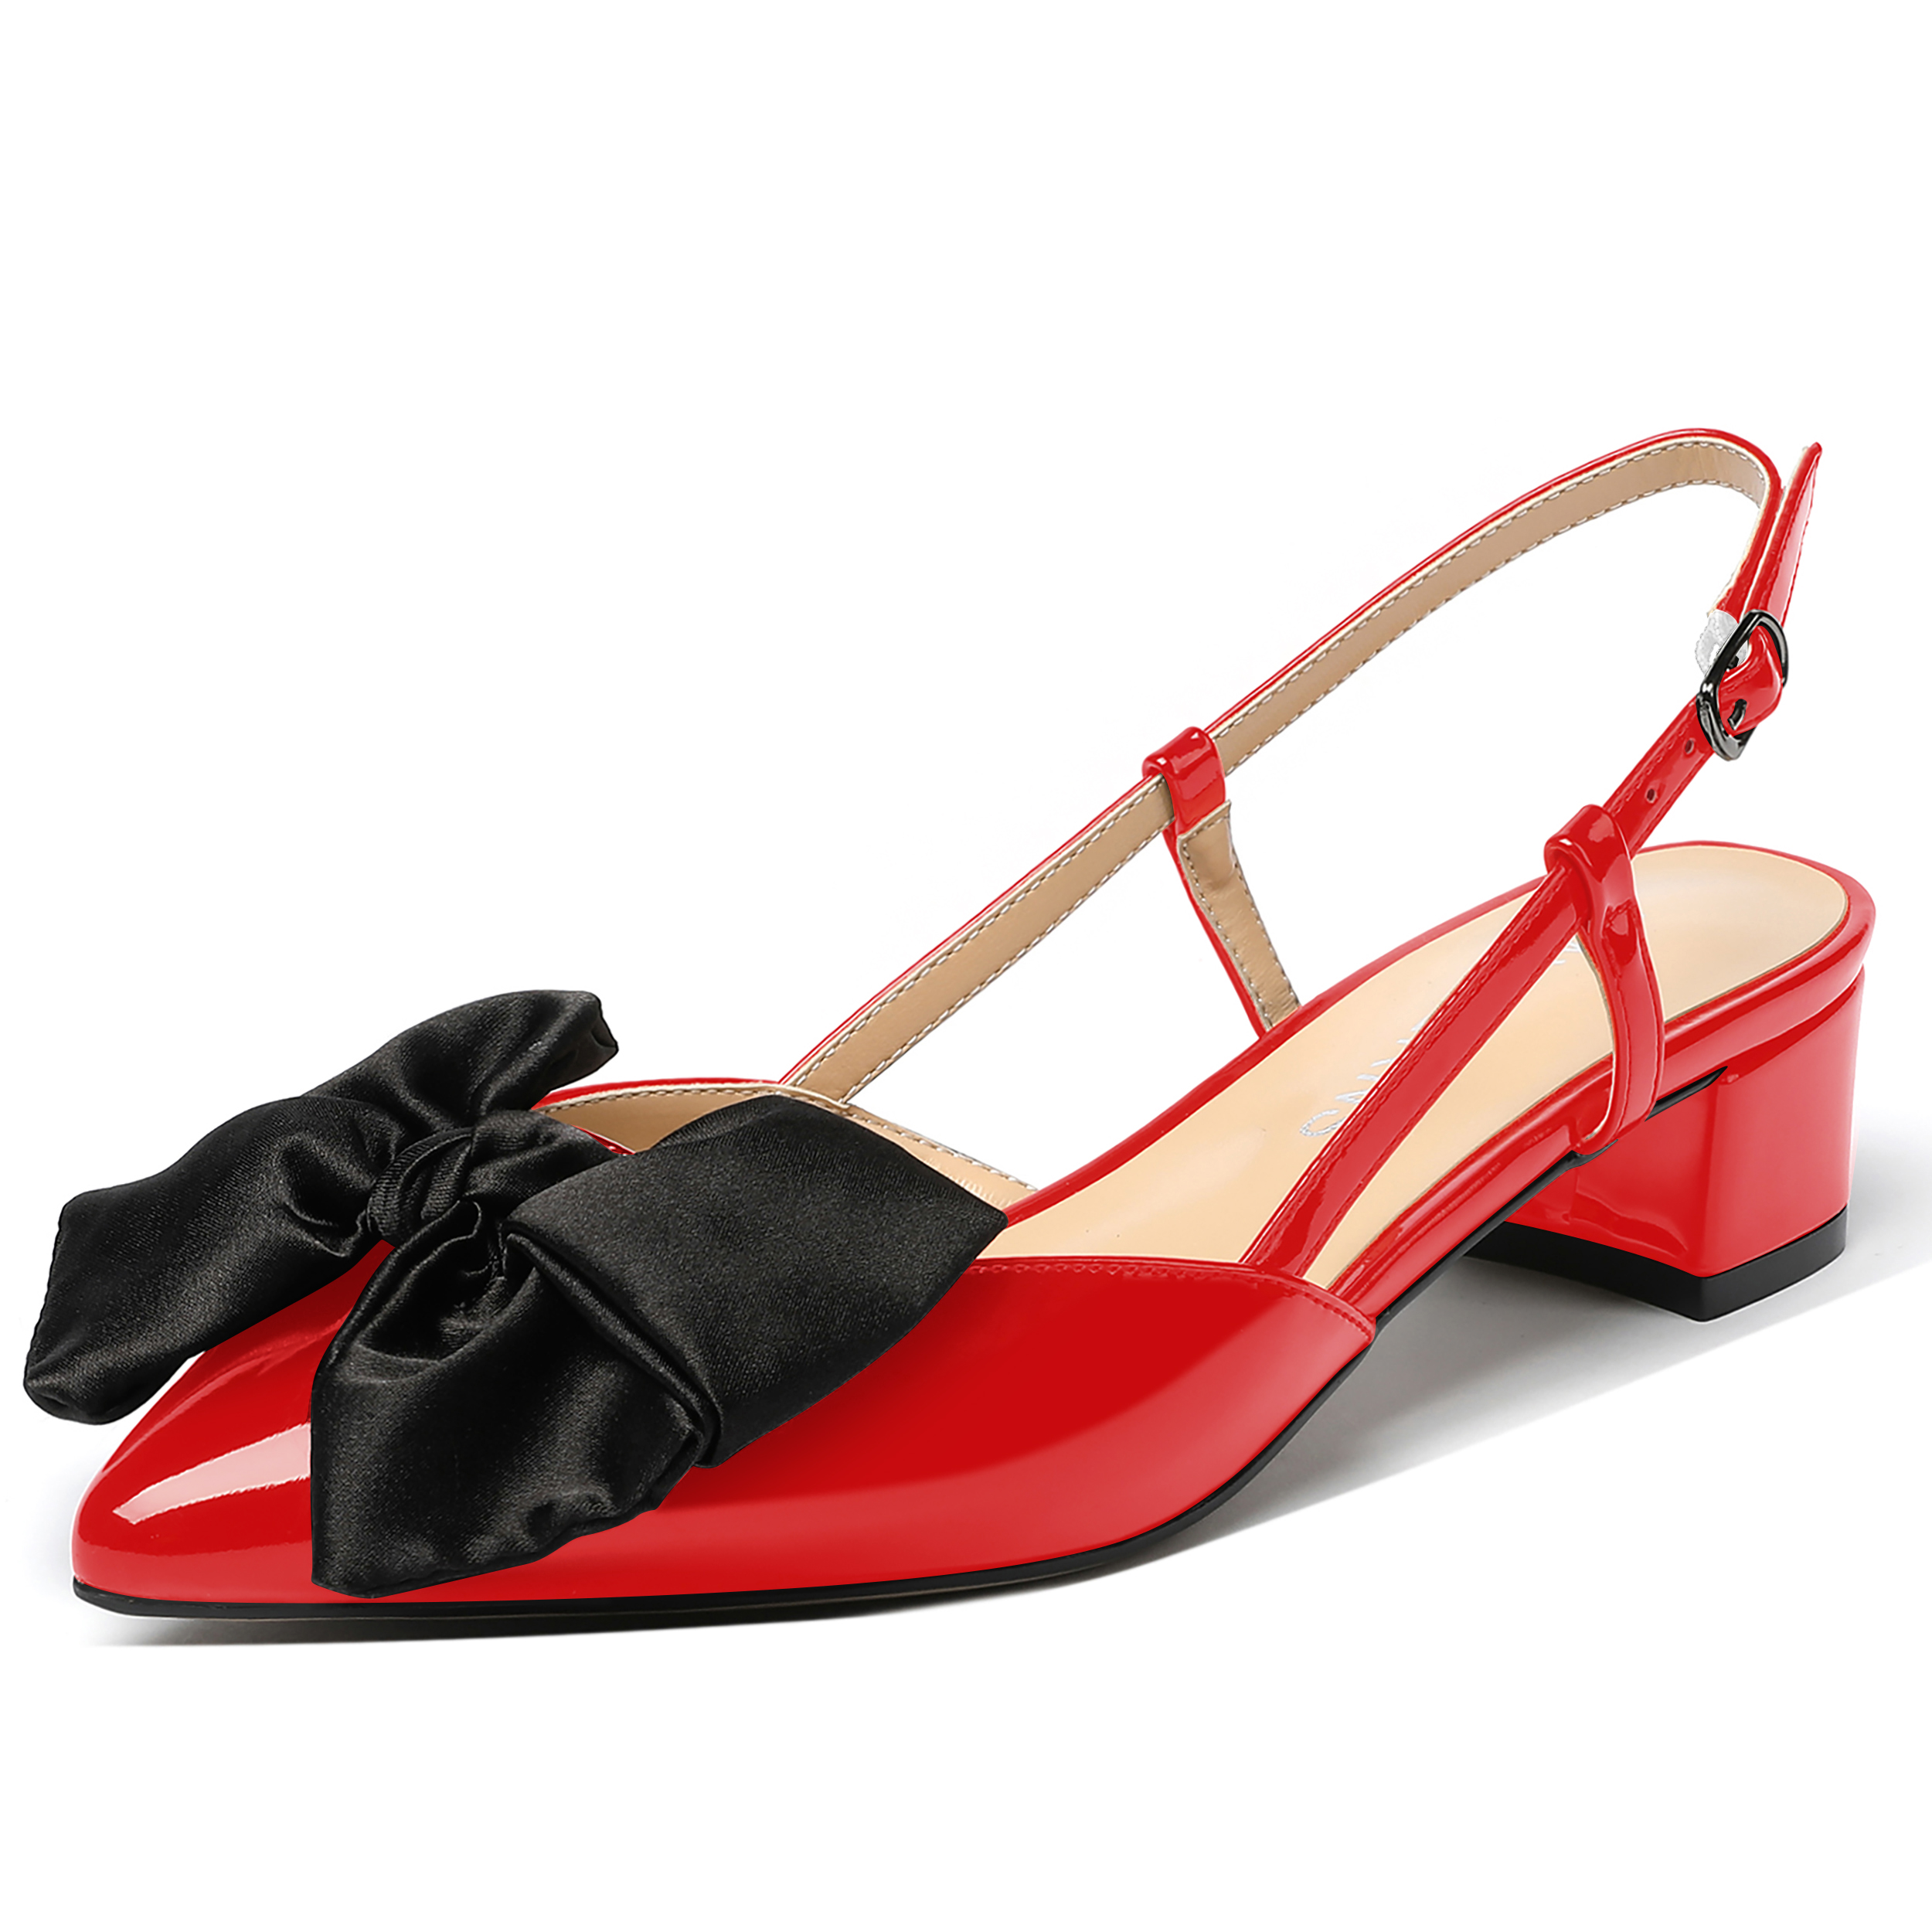 Greer Cute Slingback Chunky Heels Pumps with Bowknot